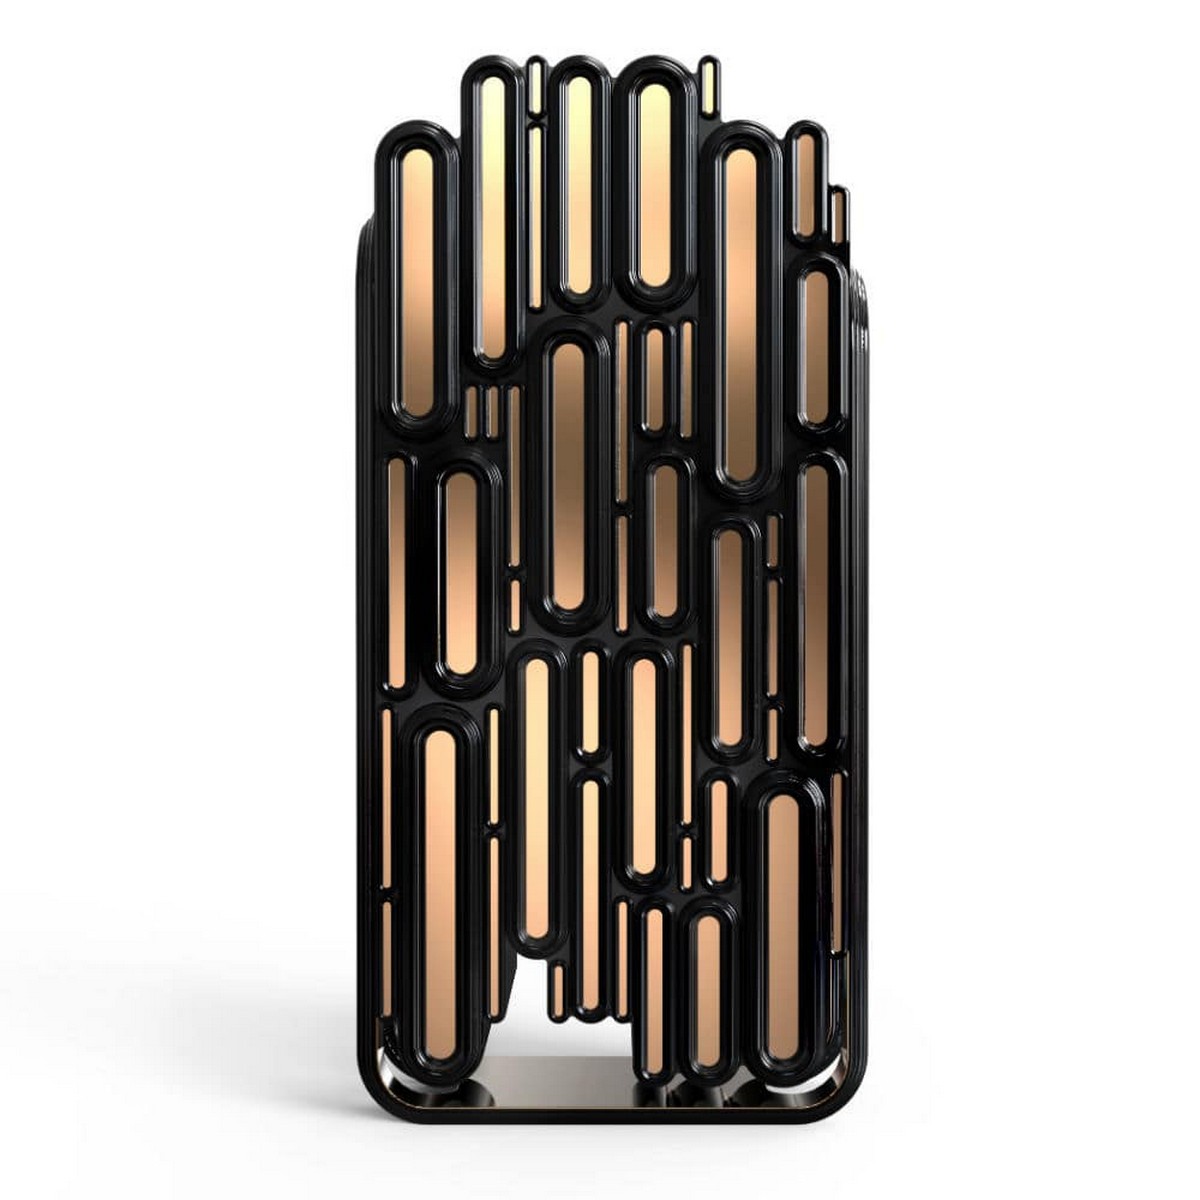 Modernistic Meets Classical: Oblong Cabinet By Boca Do Lobo